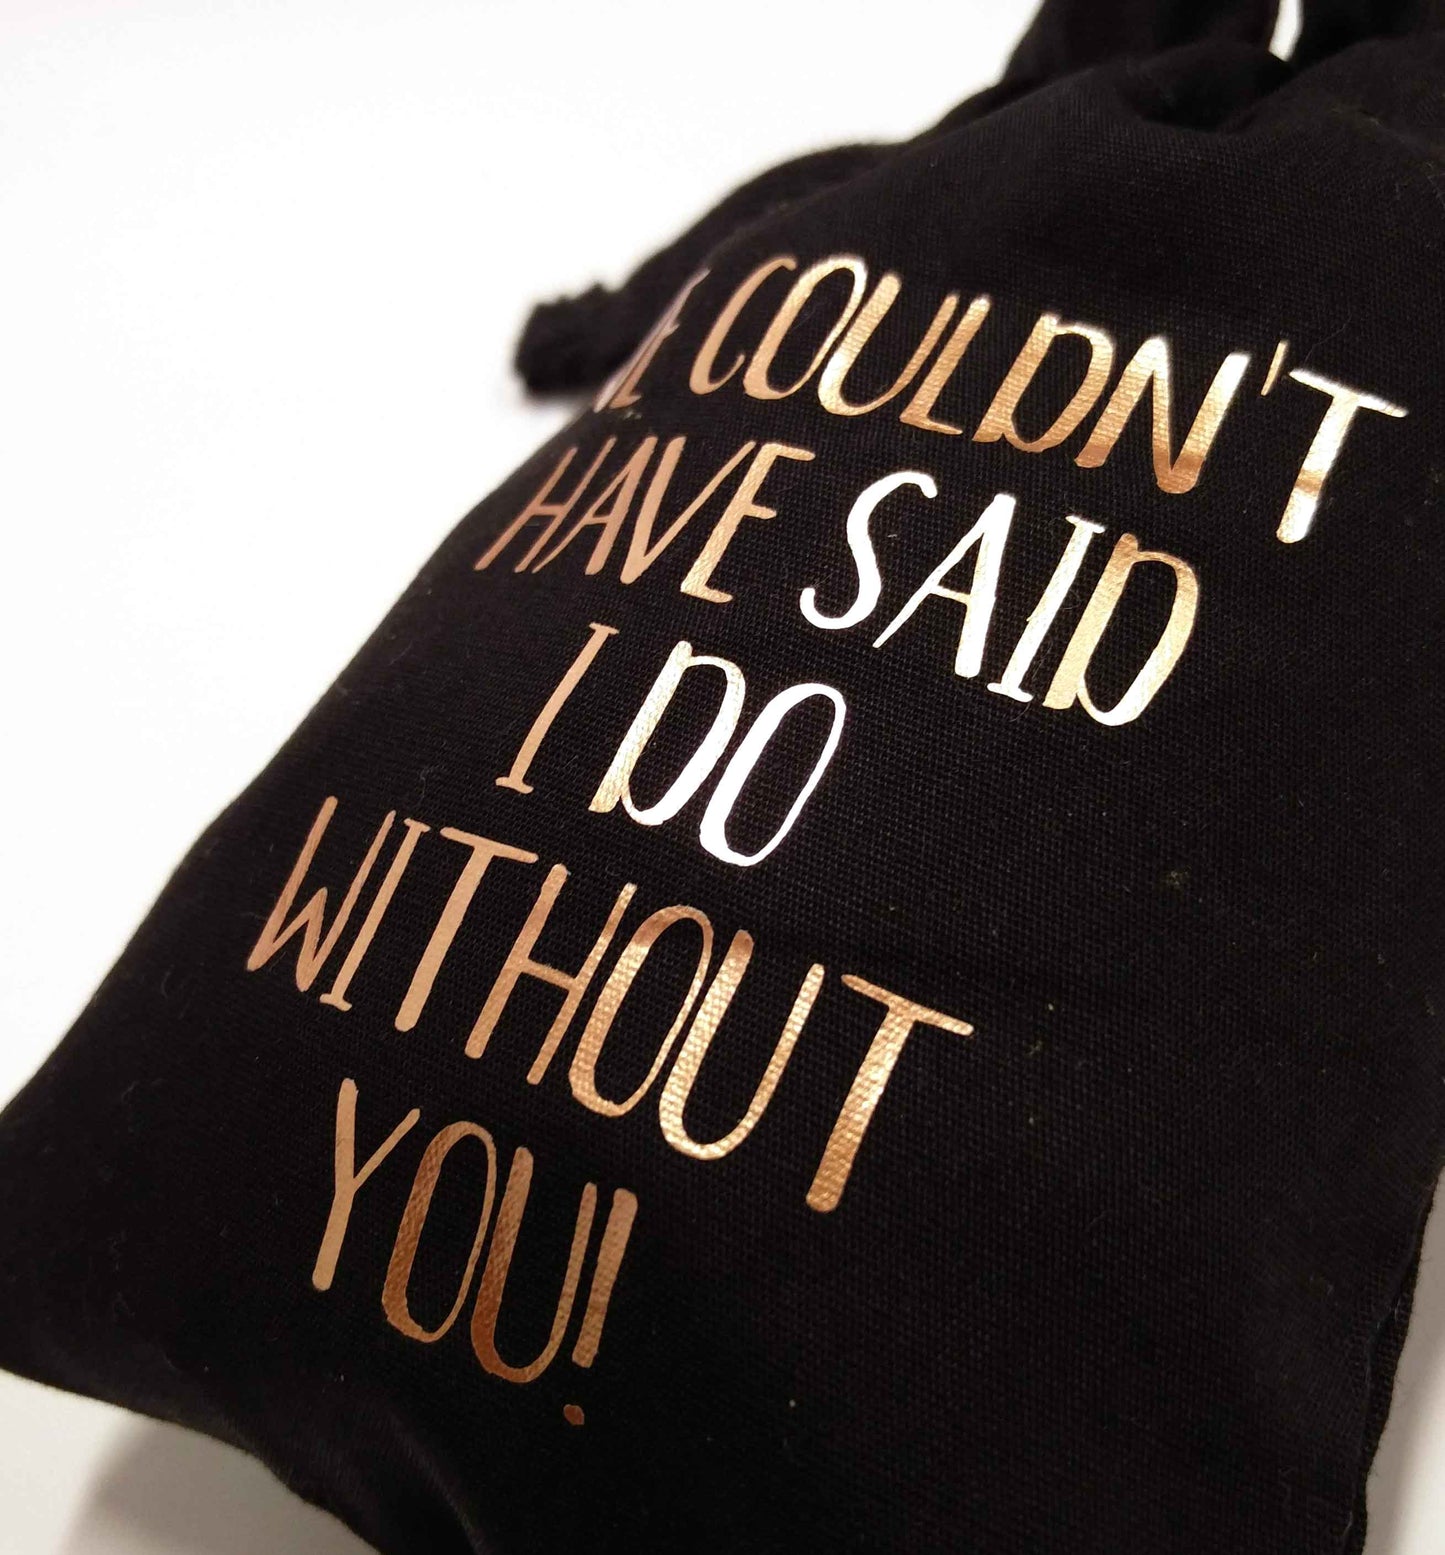 We couldn't have said I do without you - rose gold | Pouch / Drawstring bag